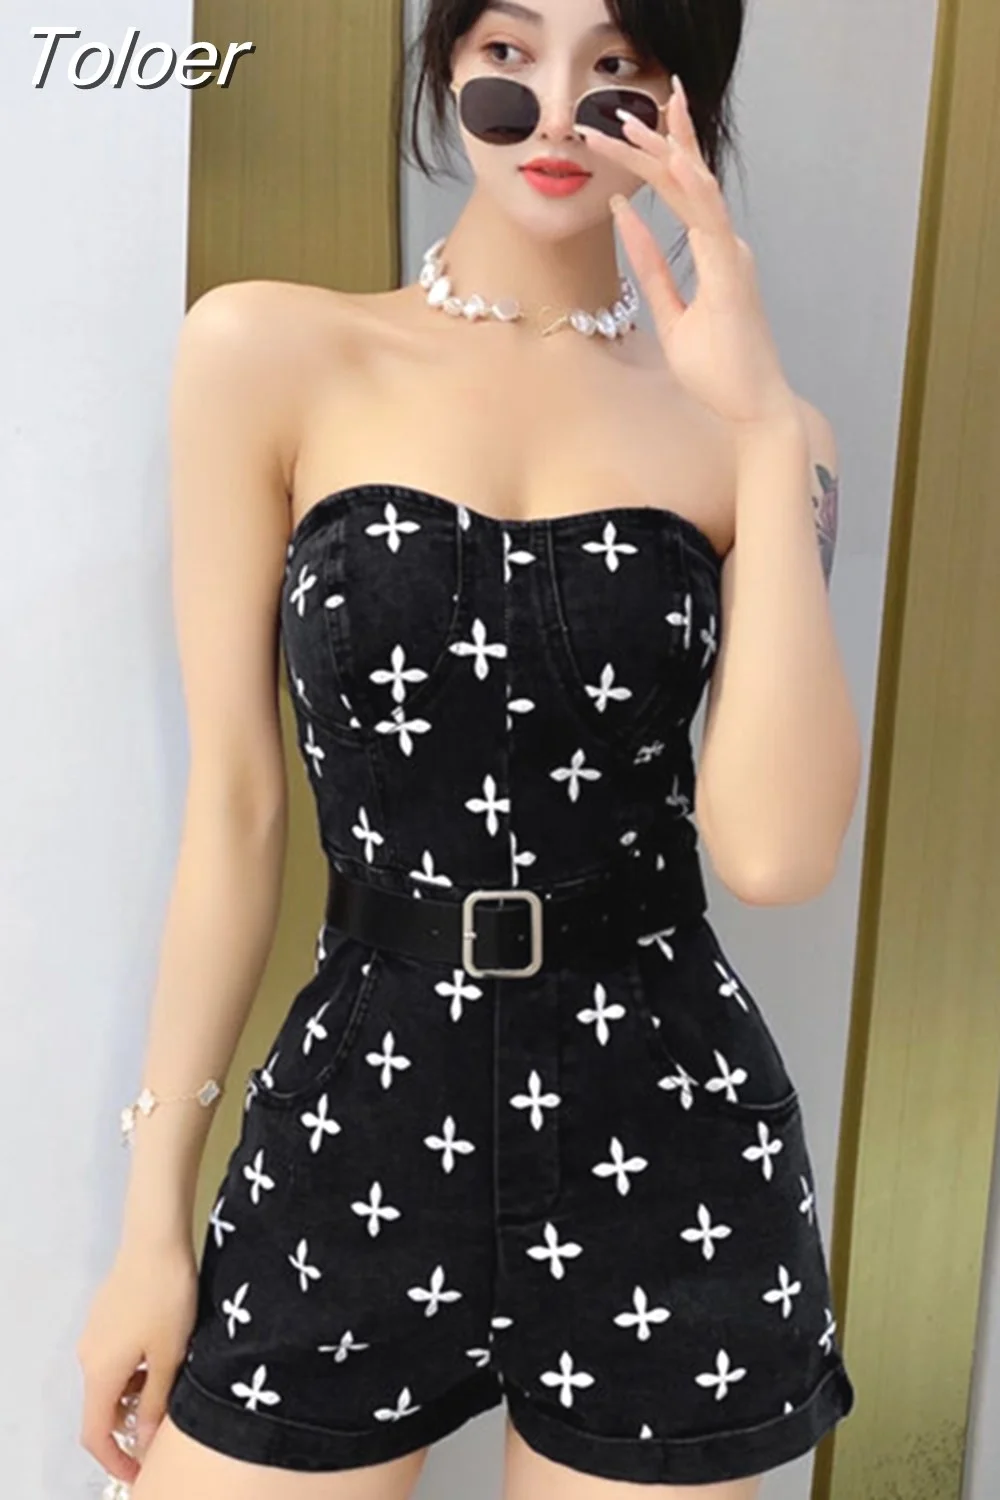 Toloer Streetwear Denim Playsuits Women's Short Sleeve Fashion Print Bodycon Casual Shots Rompers Jeans Overalls For Women